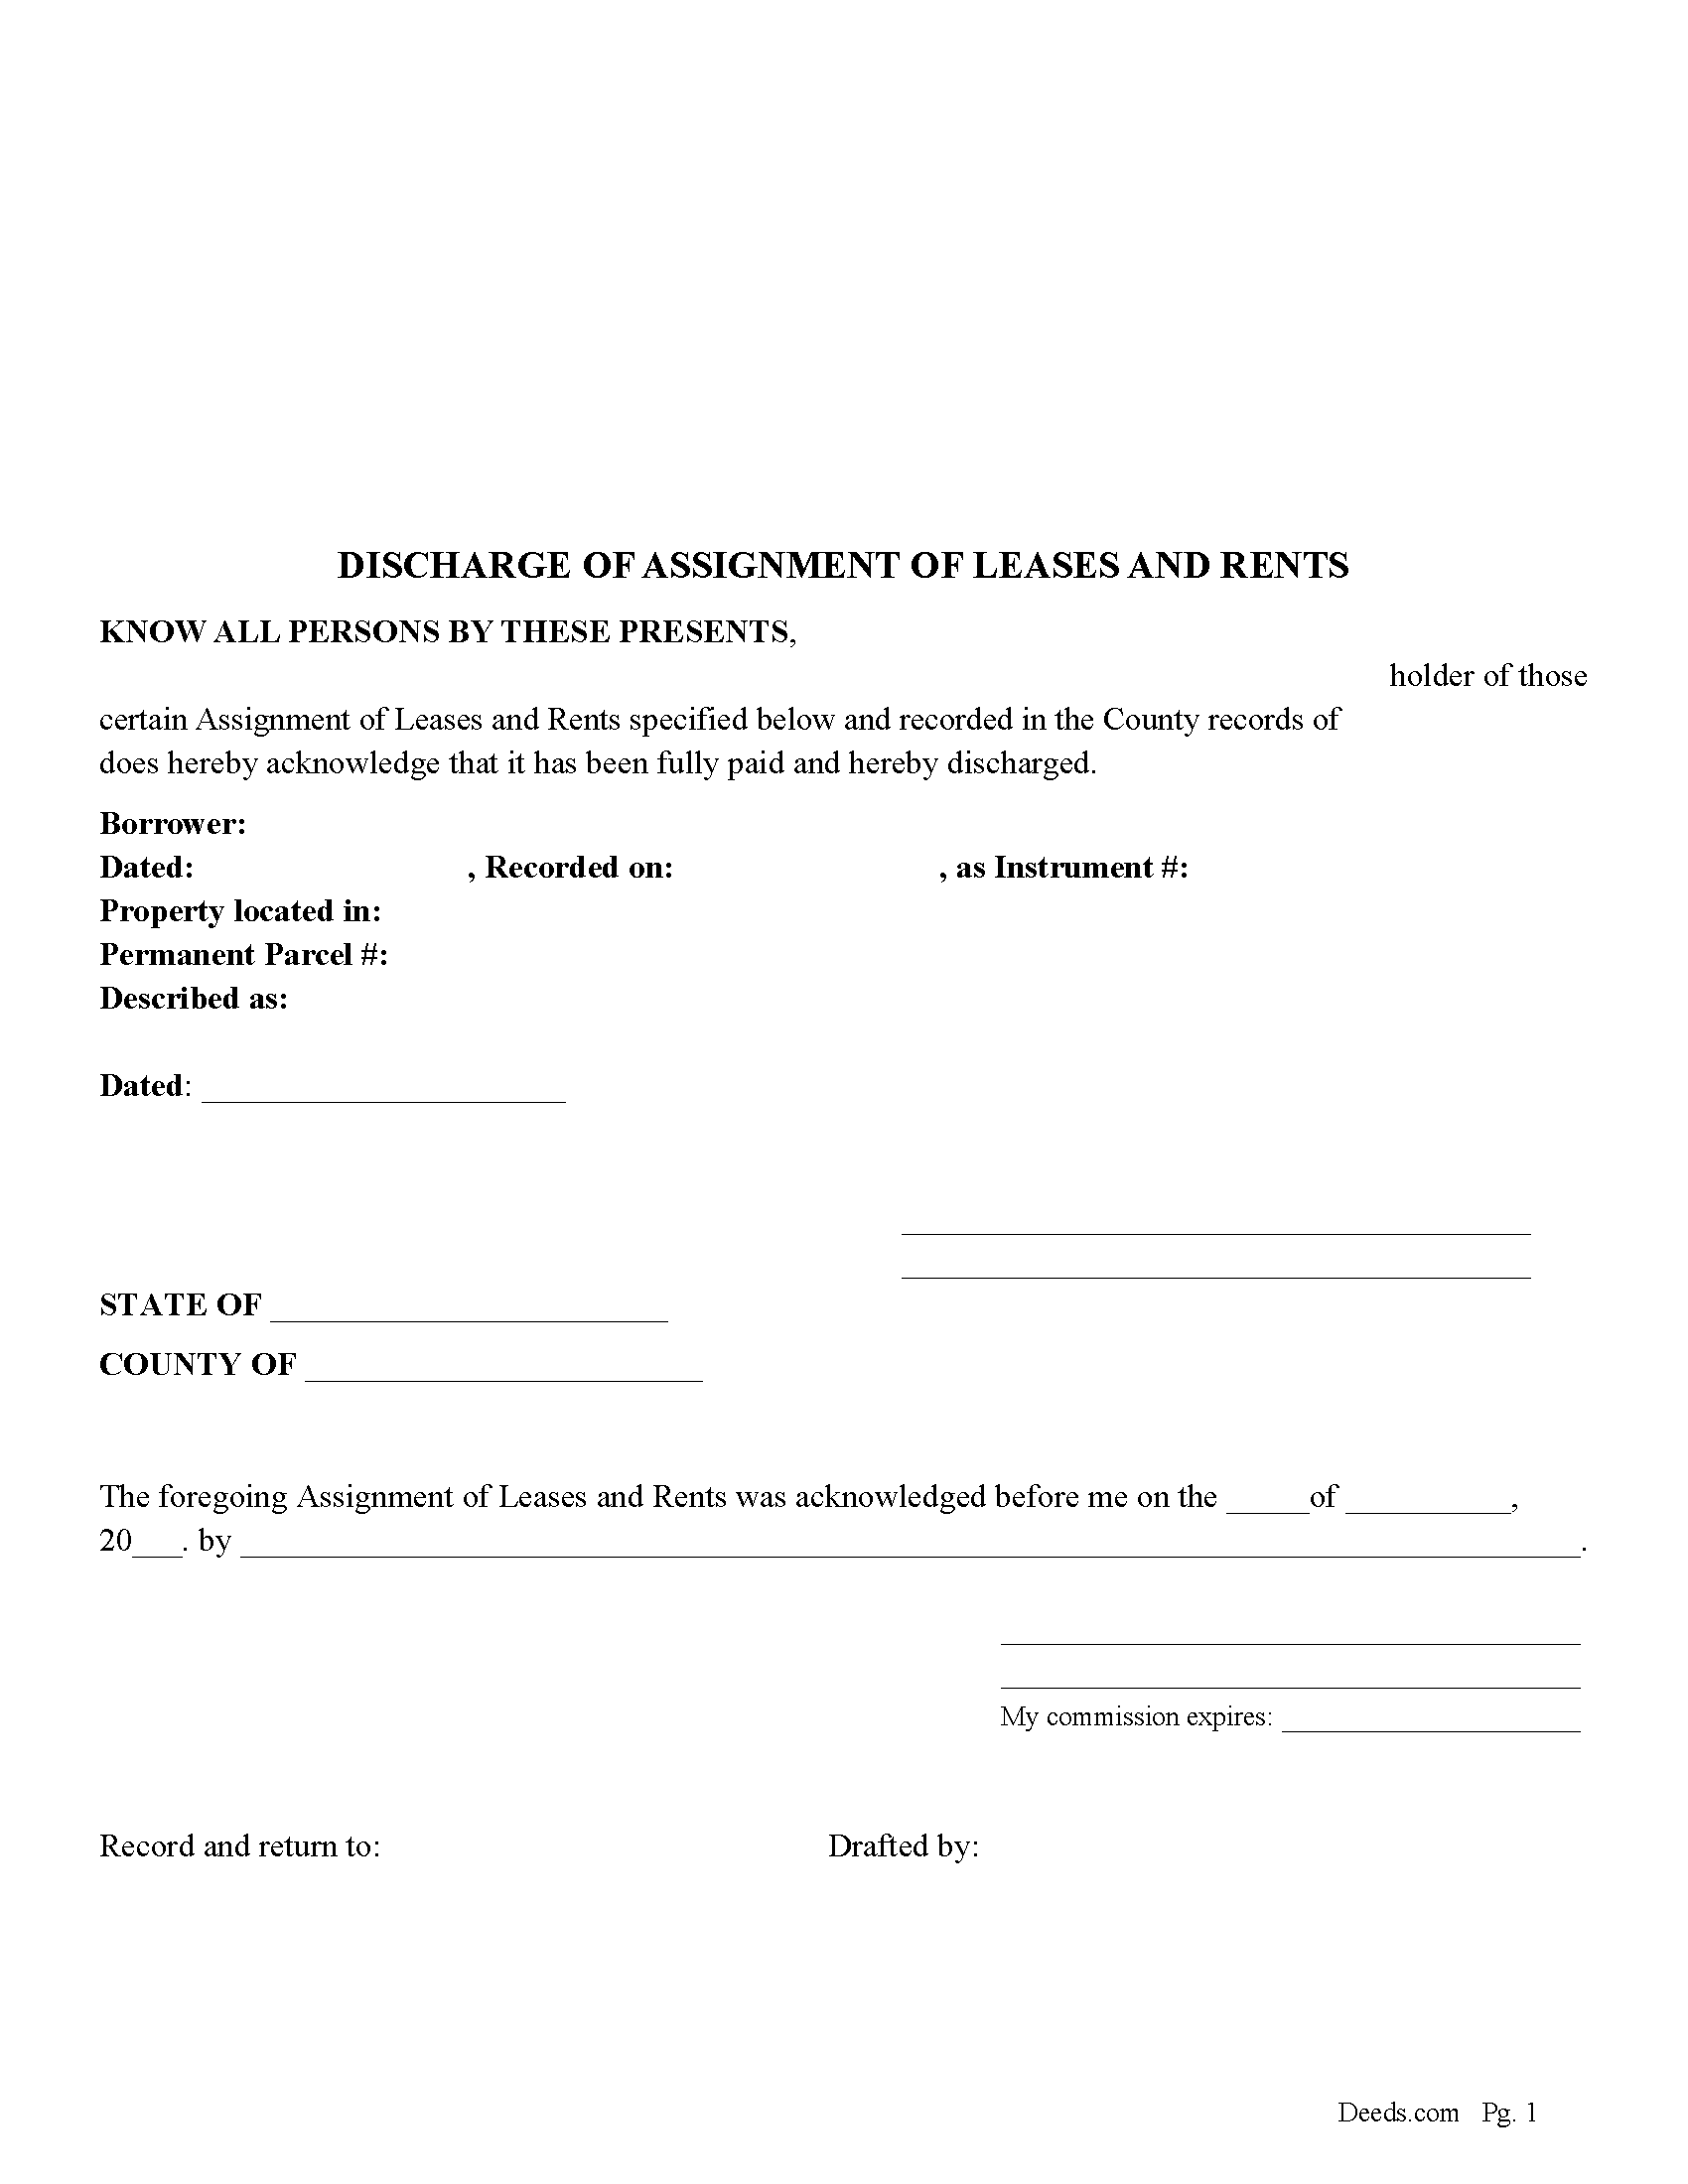 Discharge of Assignment of Leases and Rents Form